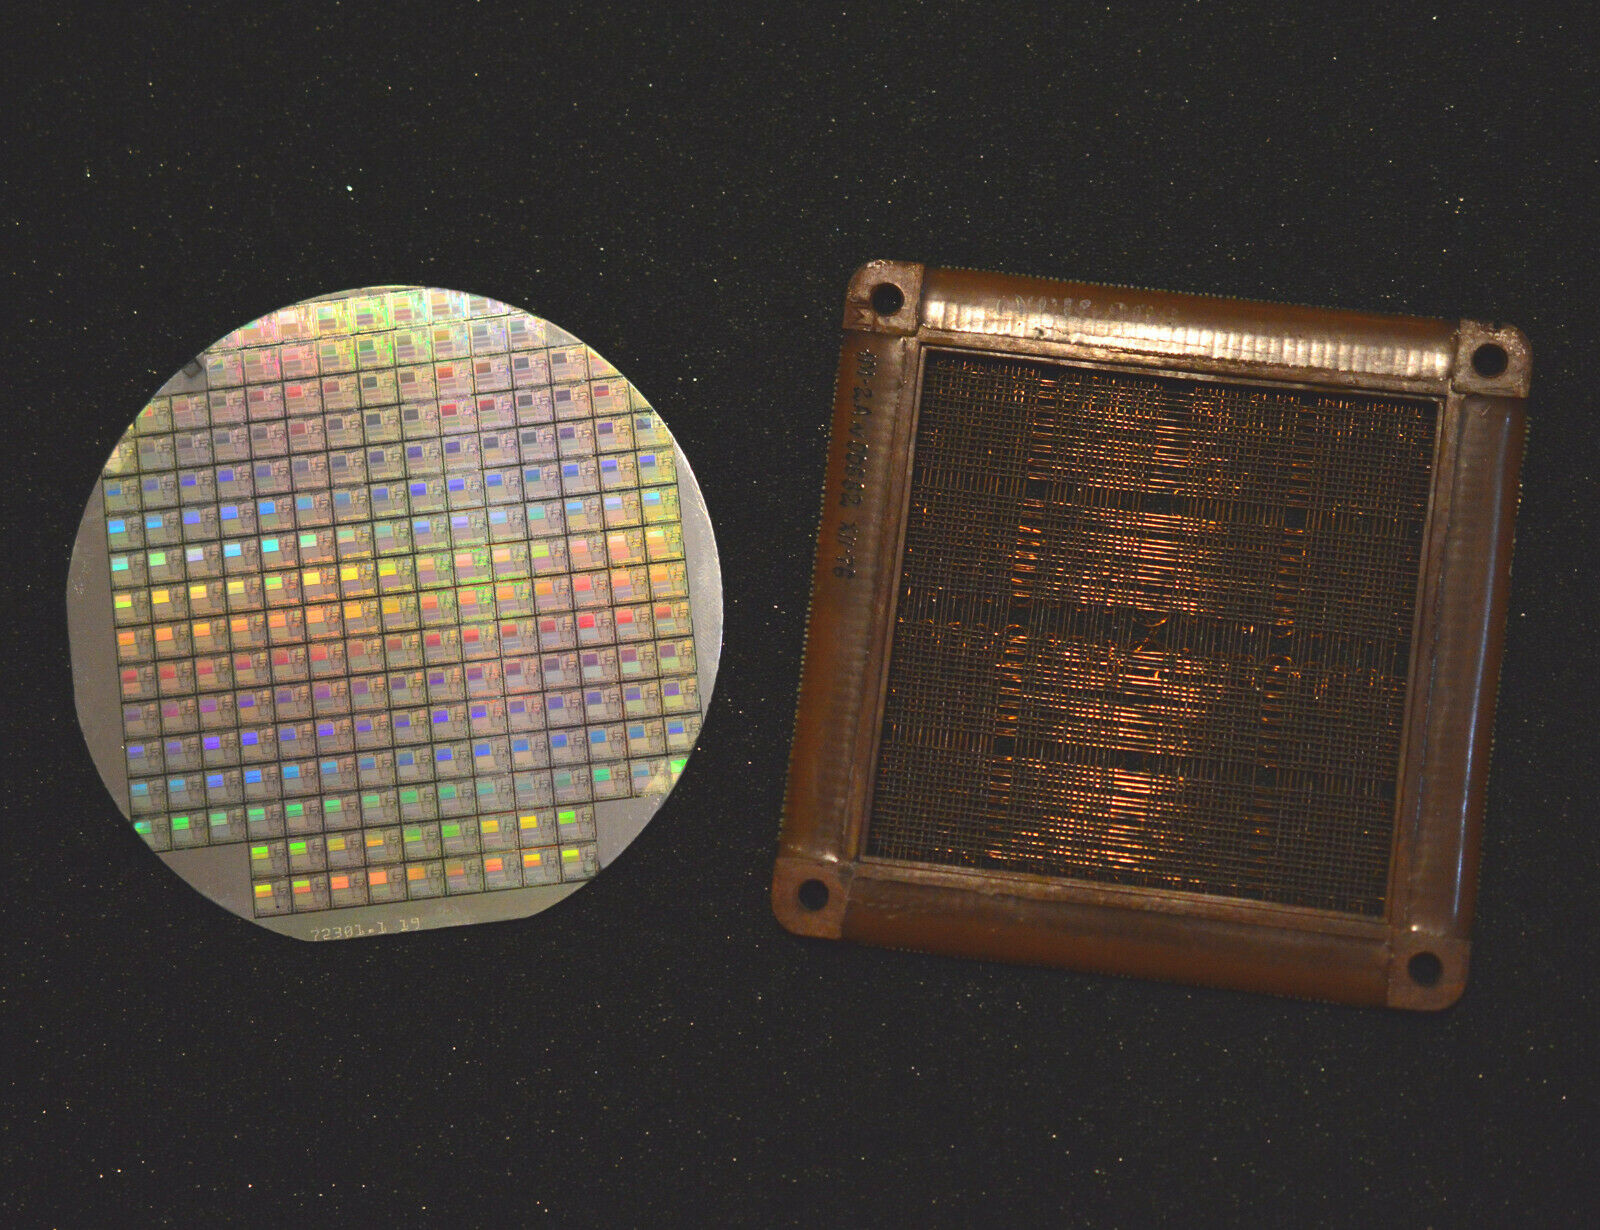 Magnetic Core Memory, 2n1613 Transistor, Plus 4 Inch Silicon Wafer Of Cpu Chips